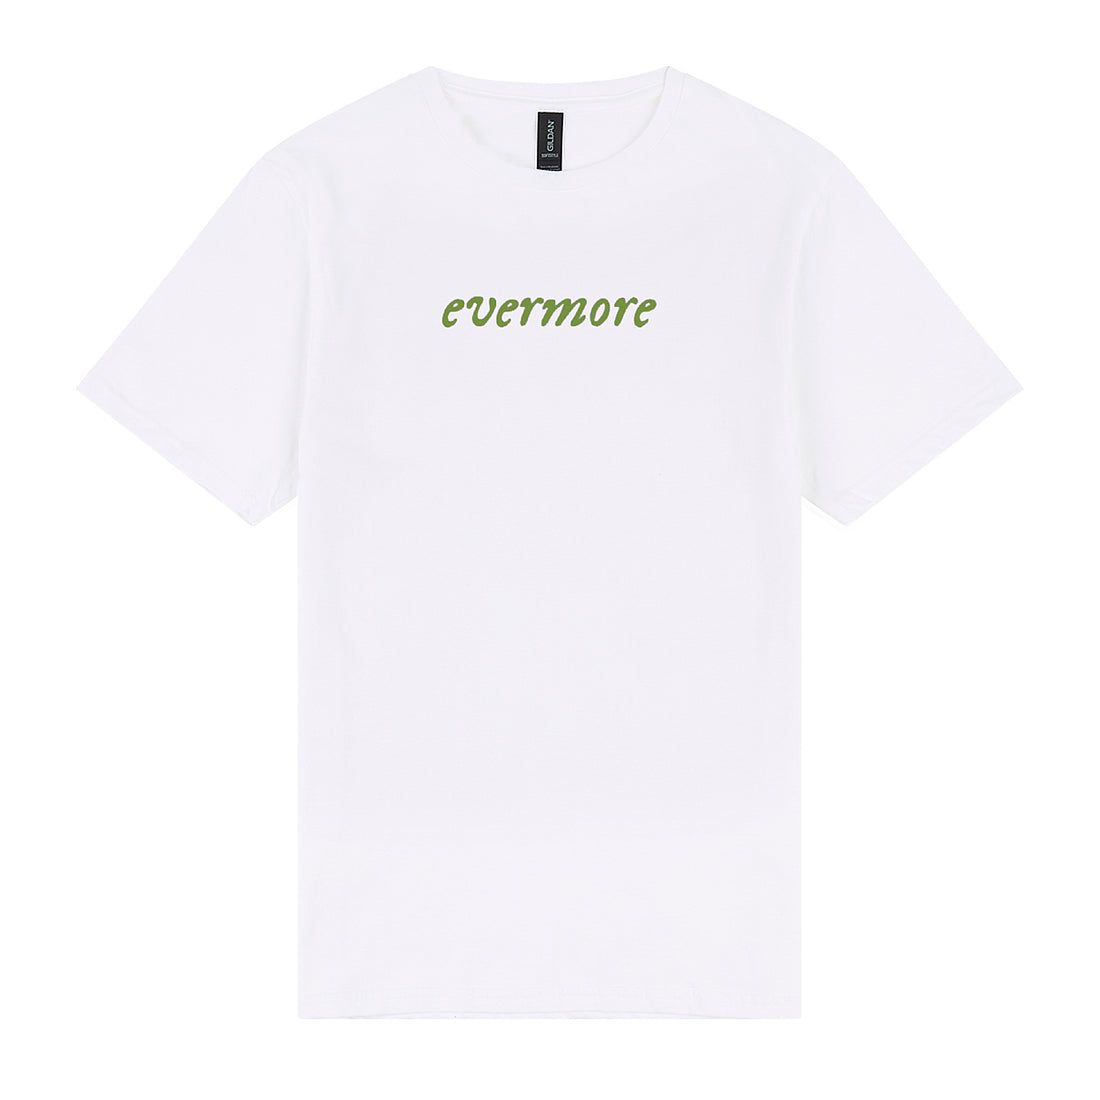 TS Evermore Tee